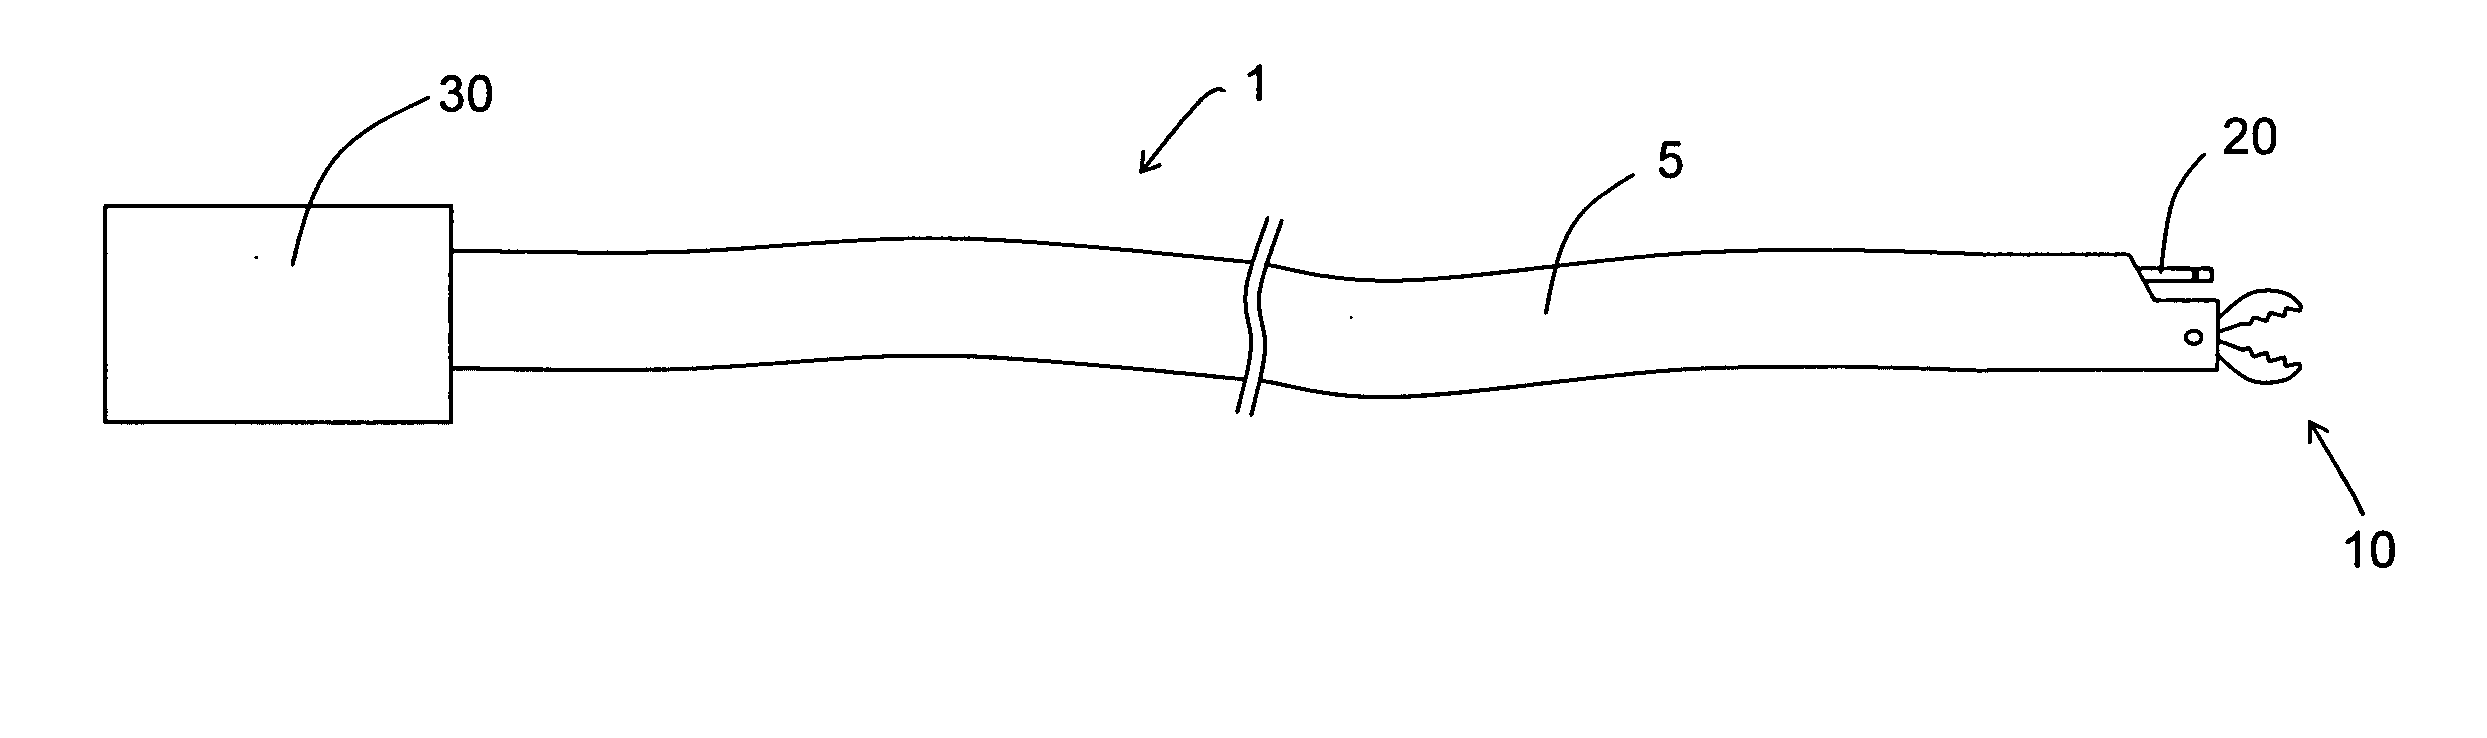 Tissue cutting devices having hemostasis capability and related methods